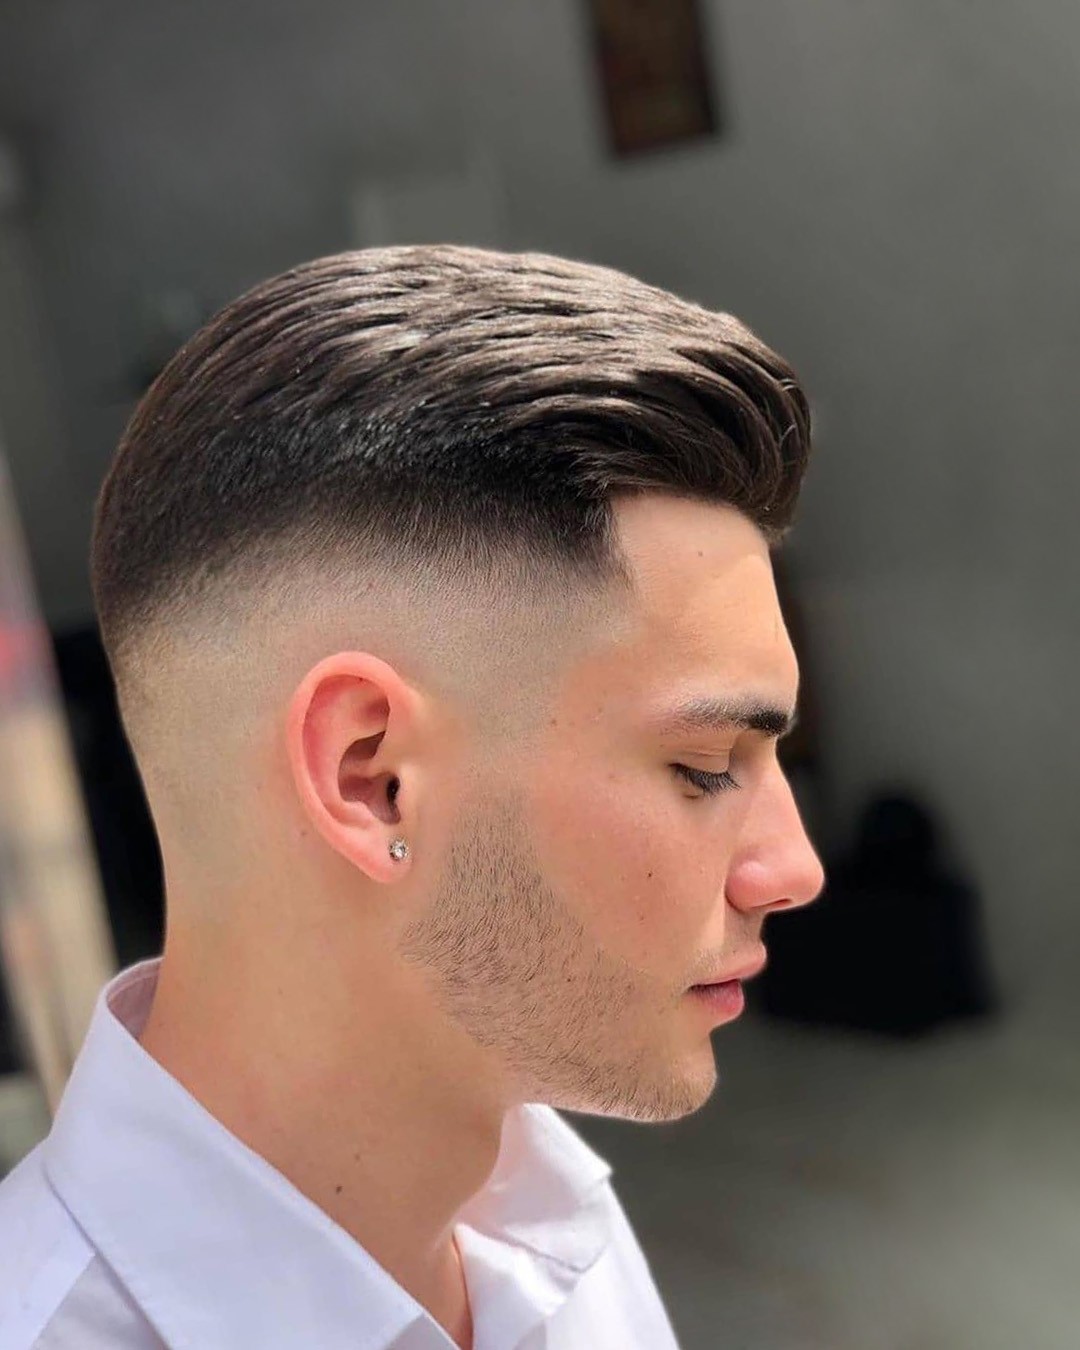 47 Skin Fade Haircuts for Neat and Super Stylish Look